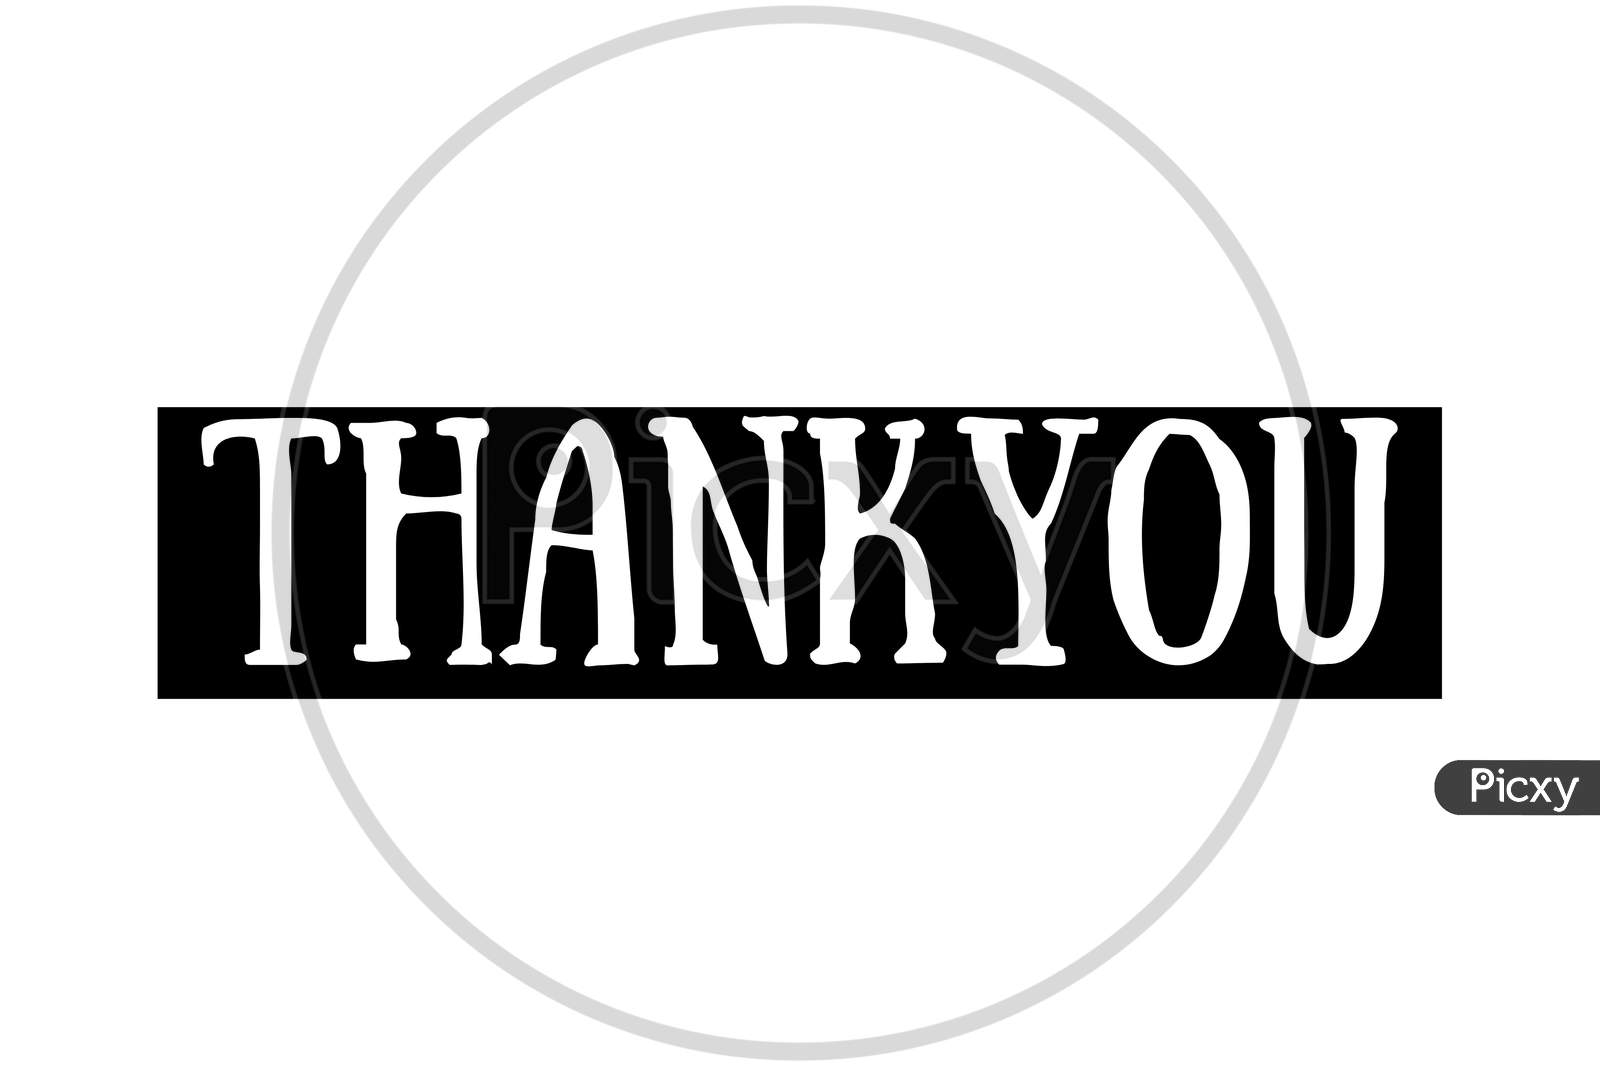 Thank You Poster With Spectrum Brush Strokes On White Background.